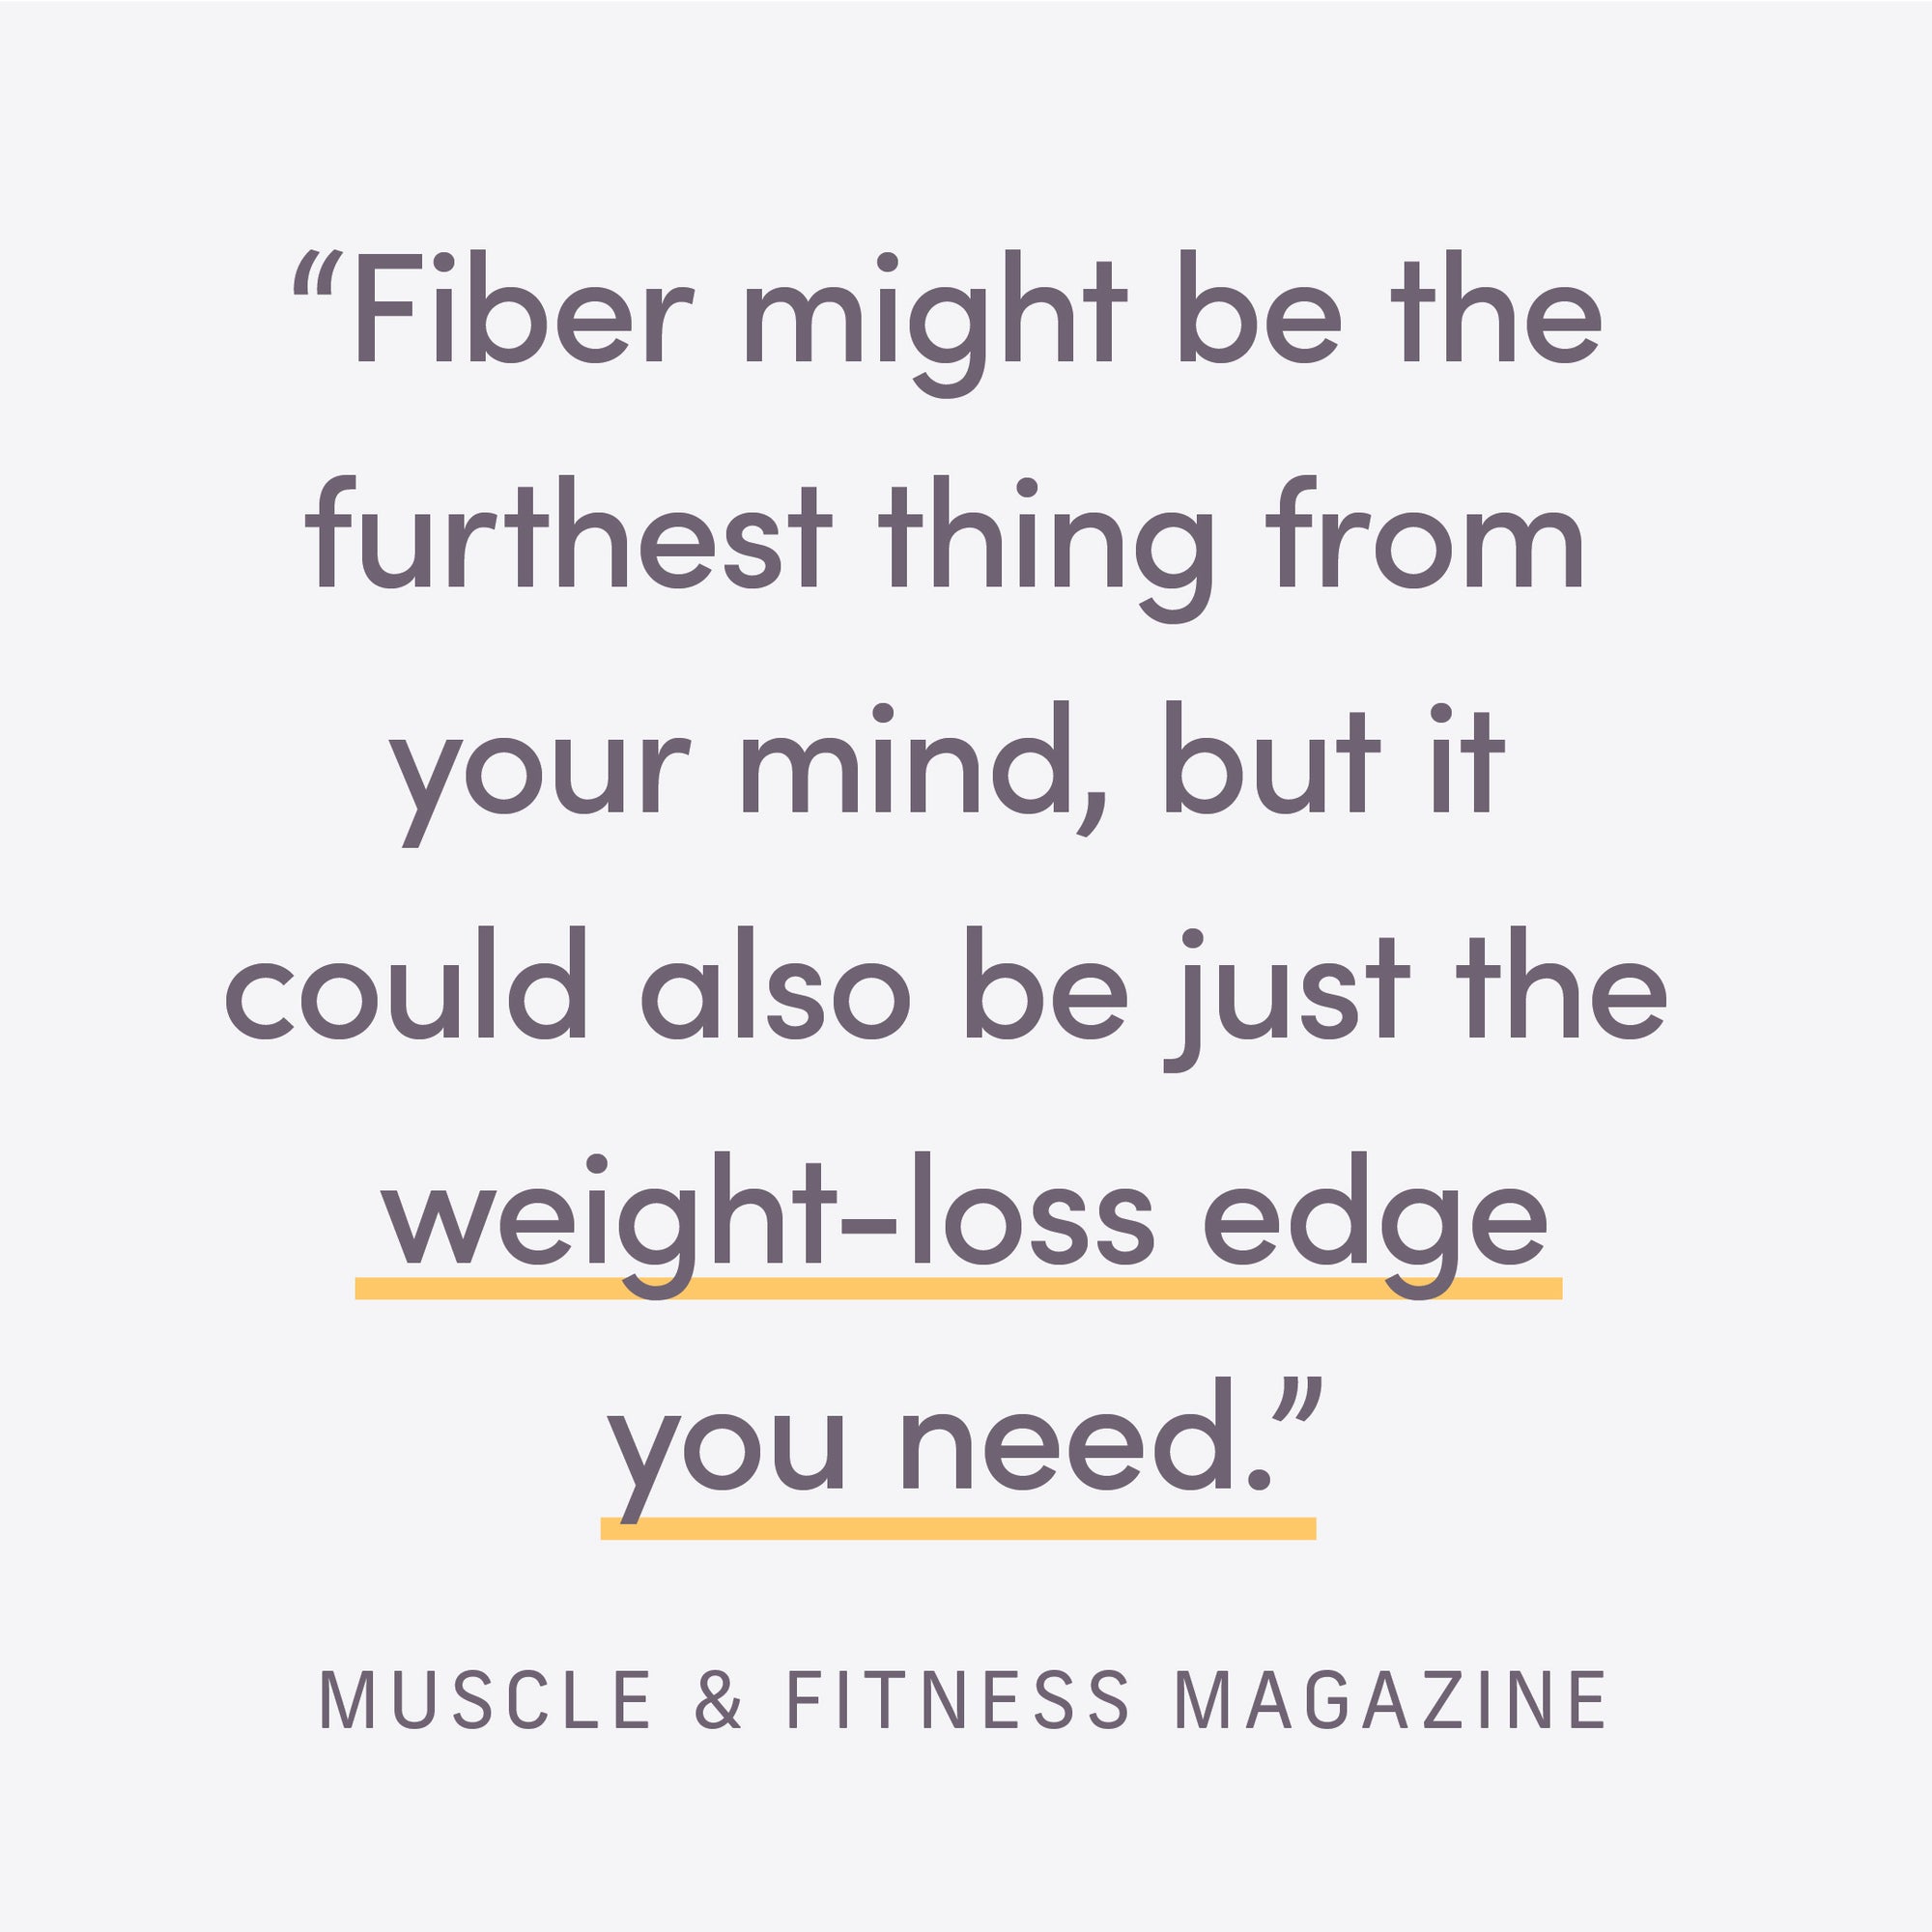 Fiber might be the furtheest thing from your mind, but it could also be just th weight-loss edge you need." Muscle & Fitness Magazine